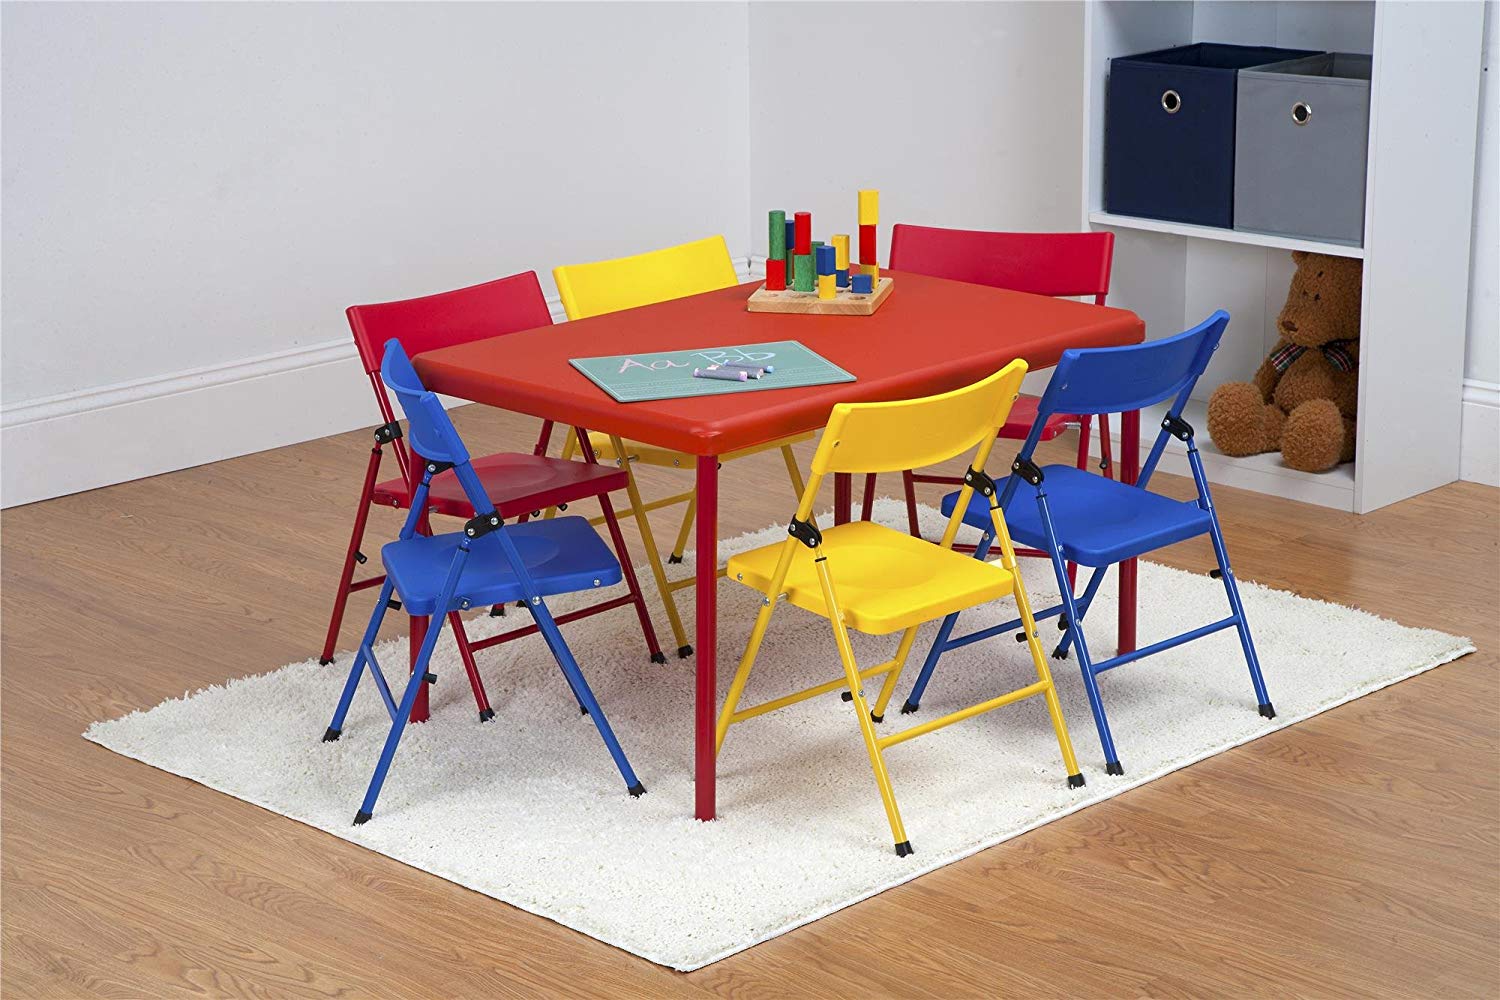 Building Blocks Toy Co Details about   KIDCHEER 7-in-1 Kids Multi Activity Table & 2 Chairs Set 